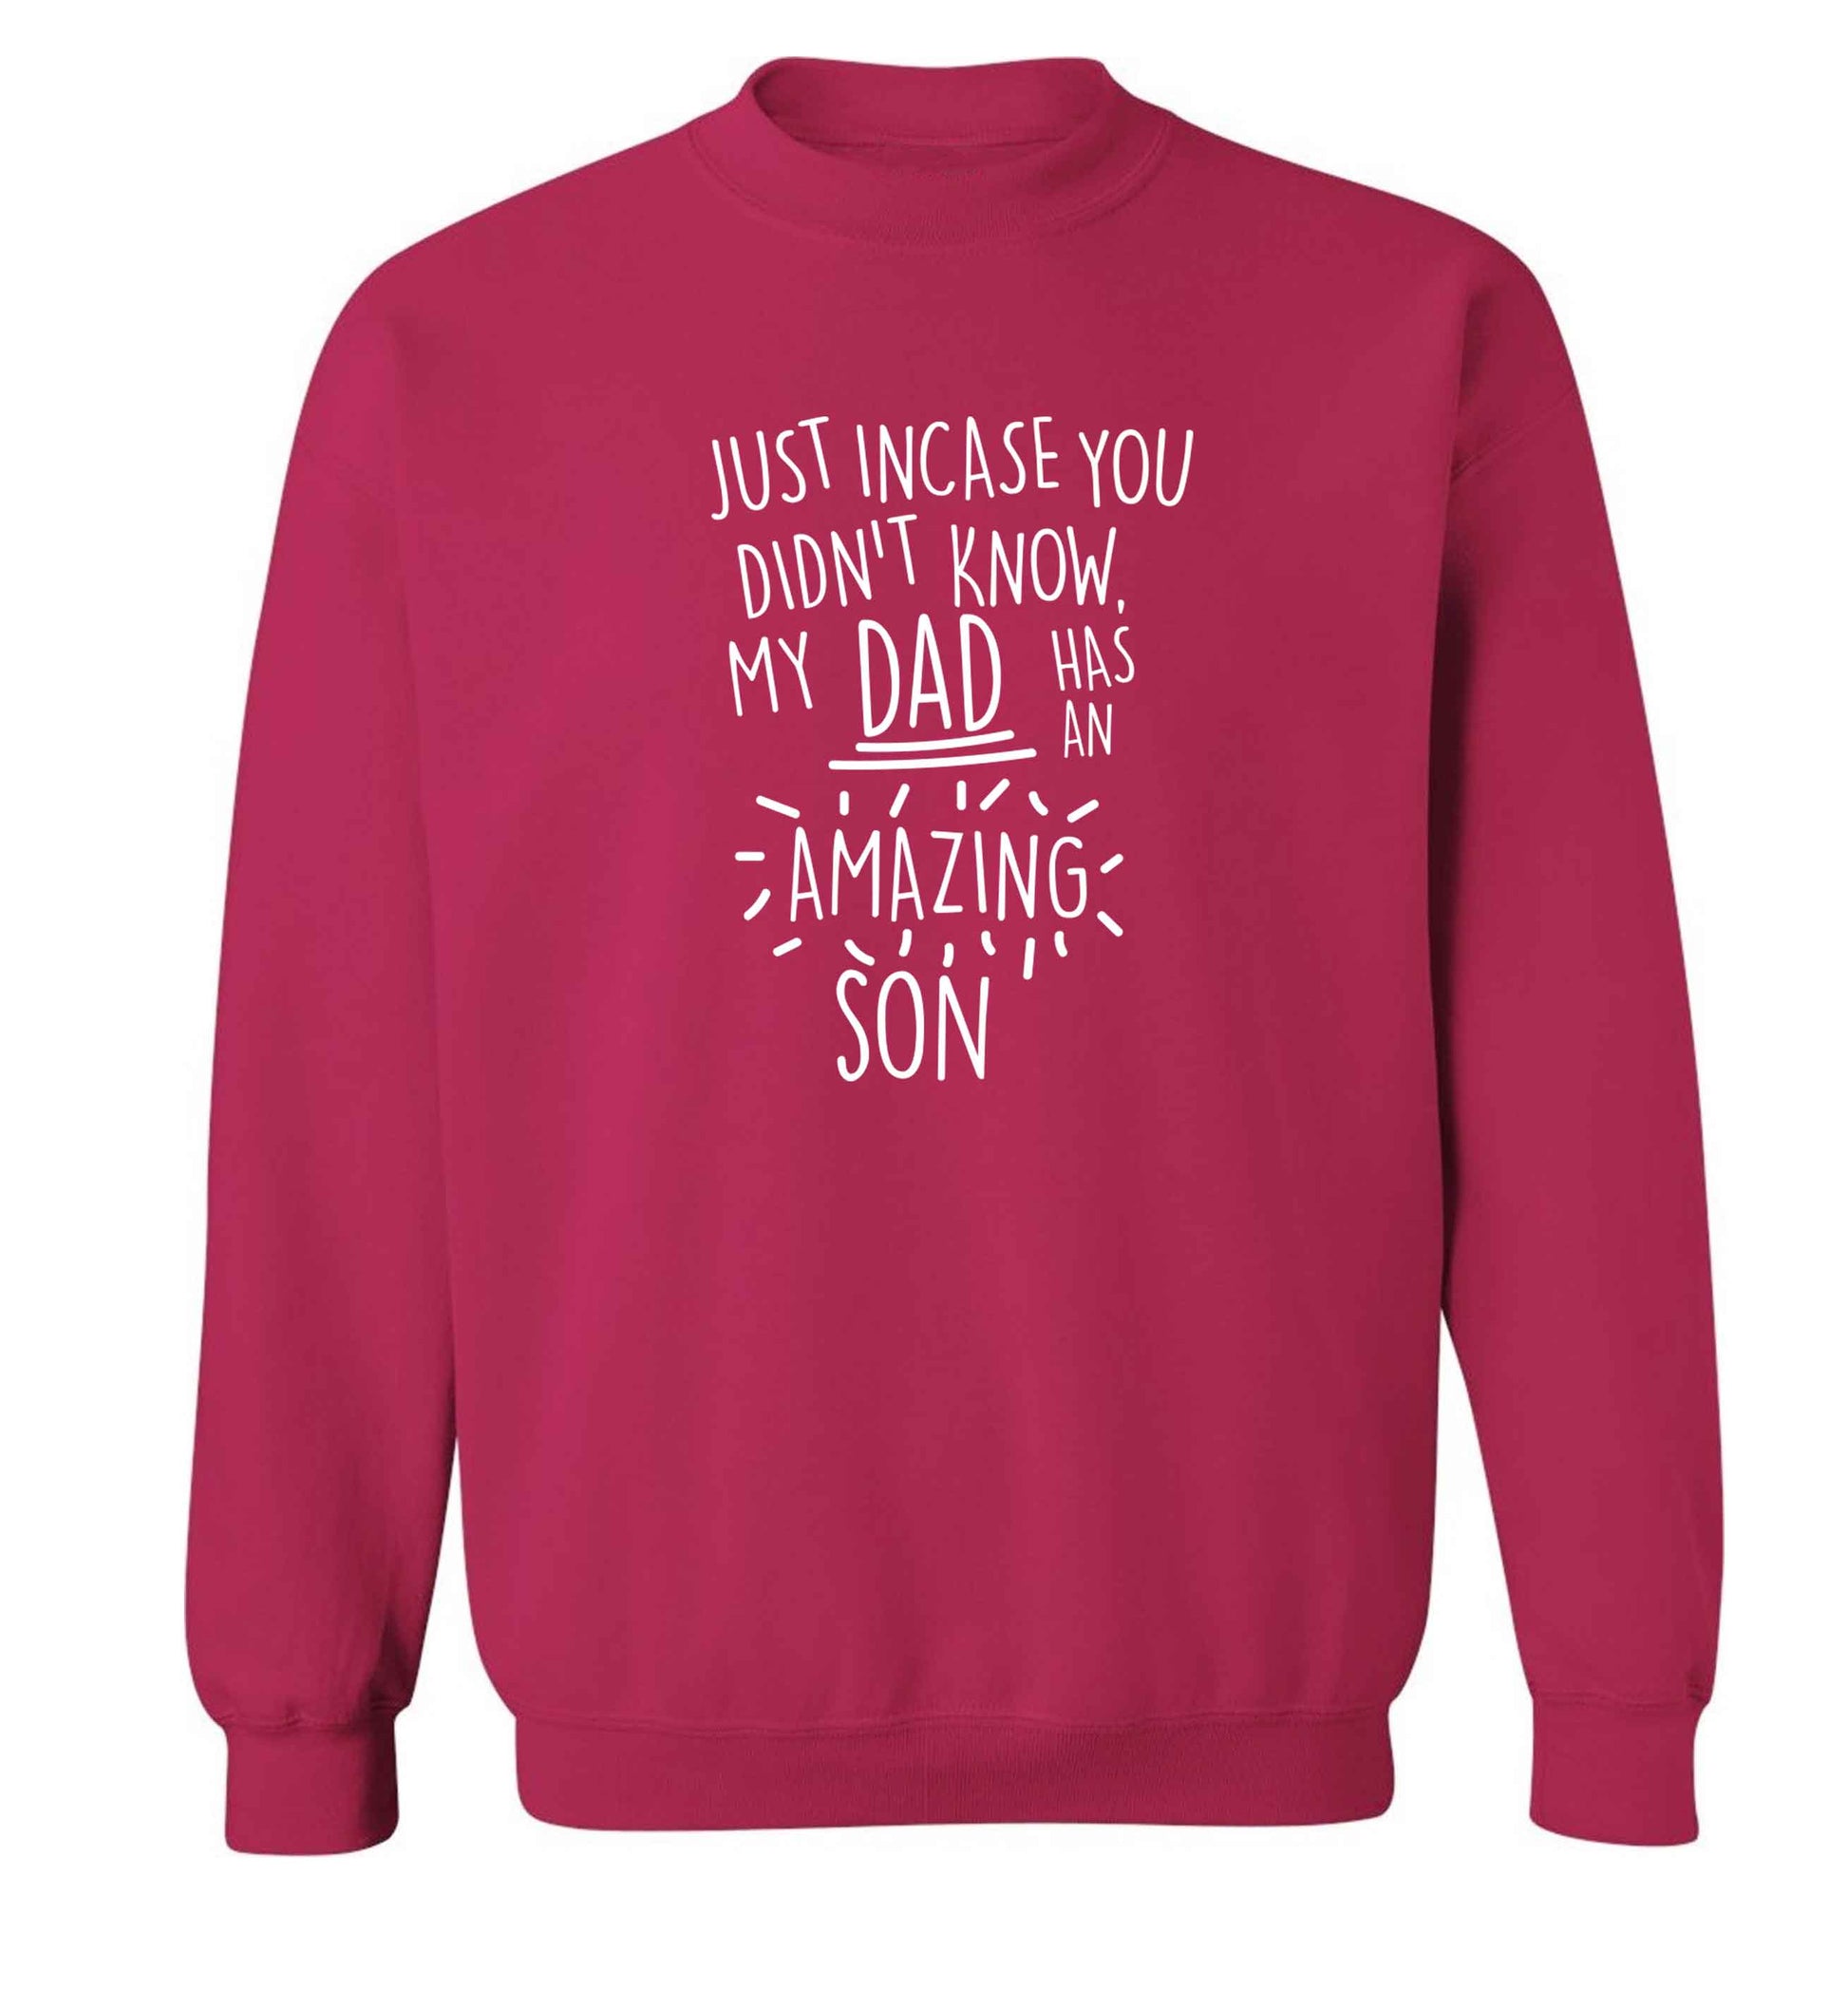 Just incase you didn't know my dad has an amazing son adult's unisex pink sweater 2XL